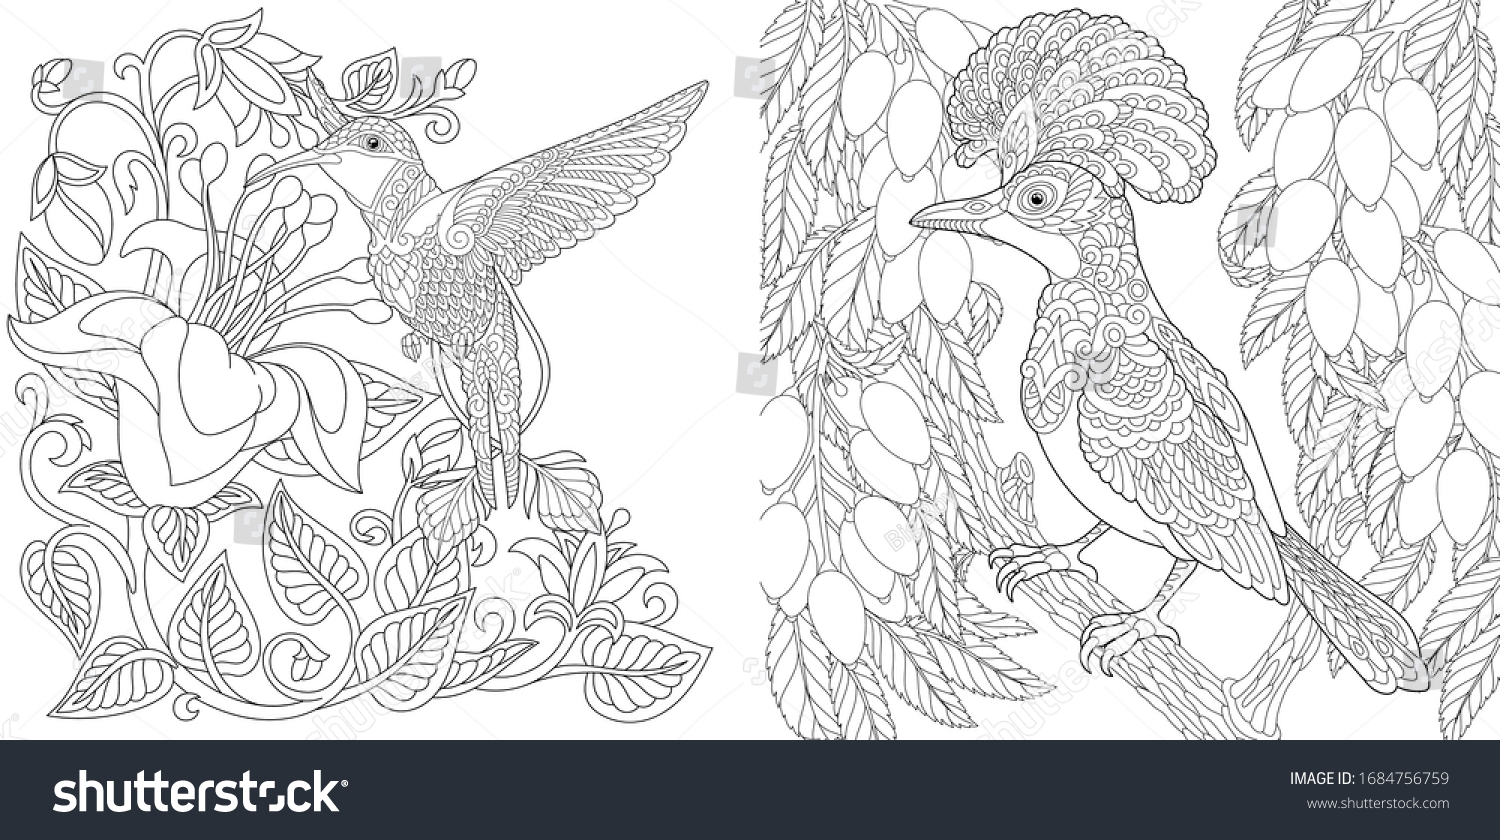 Download Coloring Pages Tropical Birds Set Hummingbird Stock Vector Royalty Free 1684756759